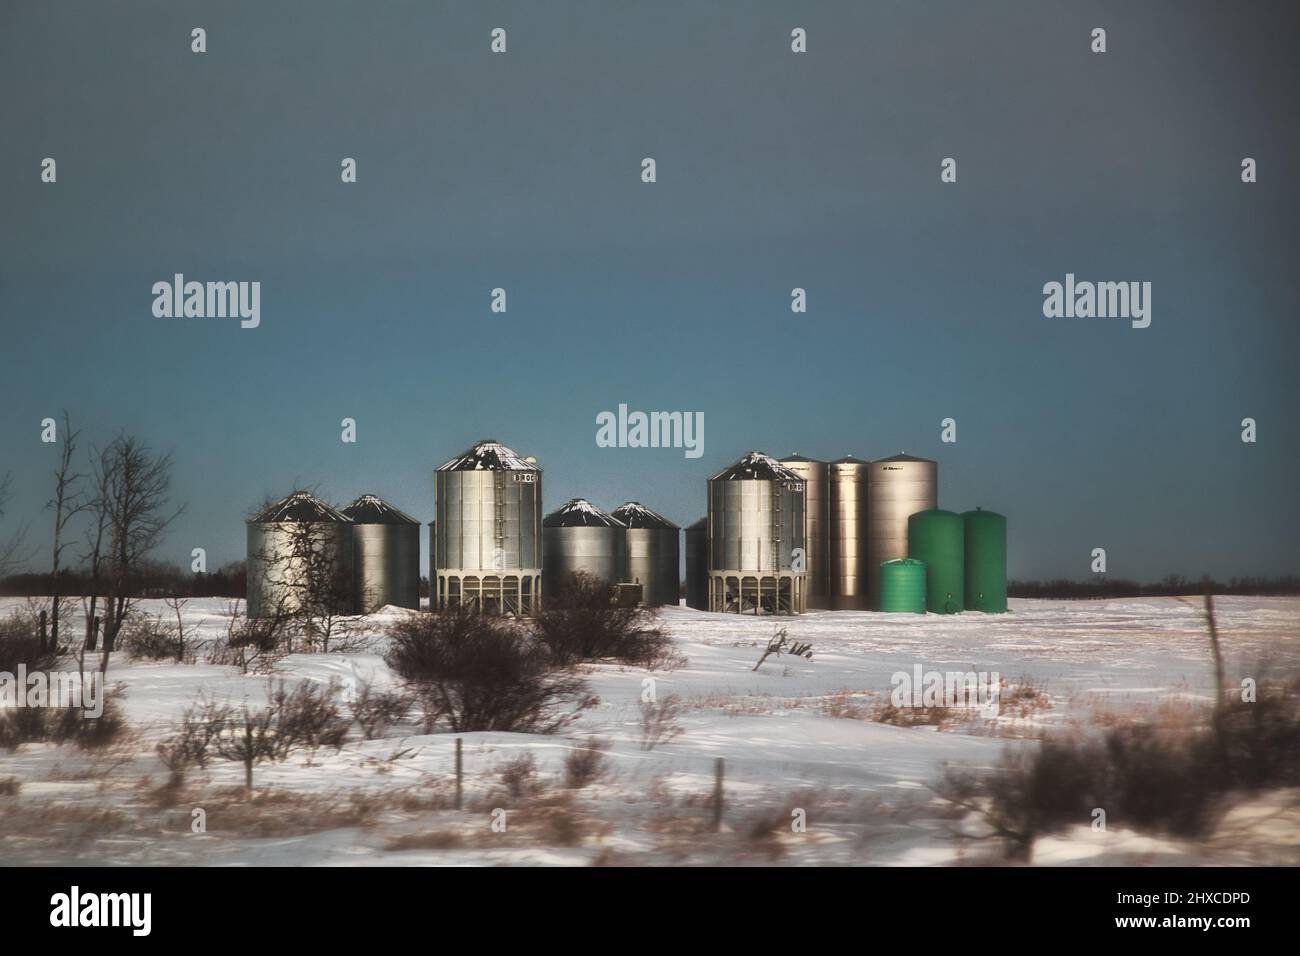 Varying sizes of steel grain storage bins in a rural winter agricultural landscape dotted with trees Stock Photo